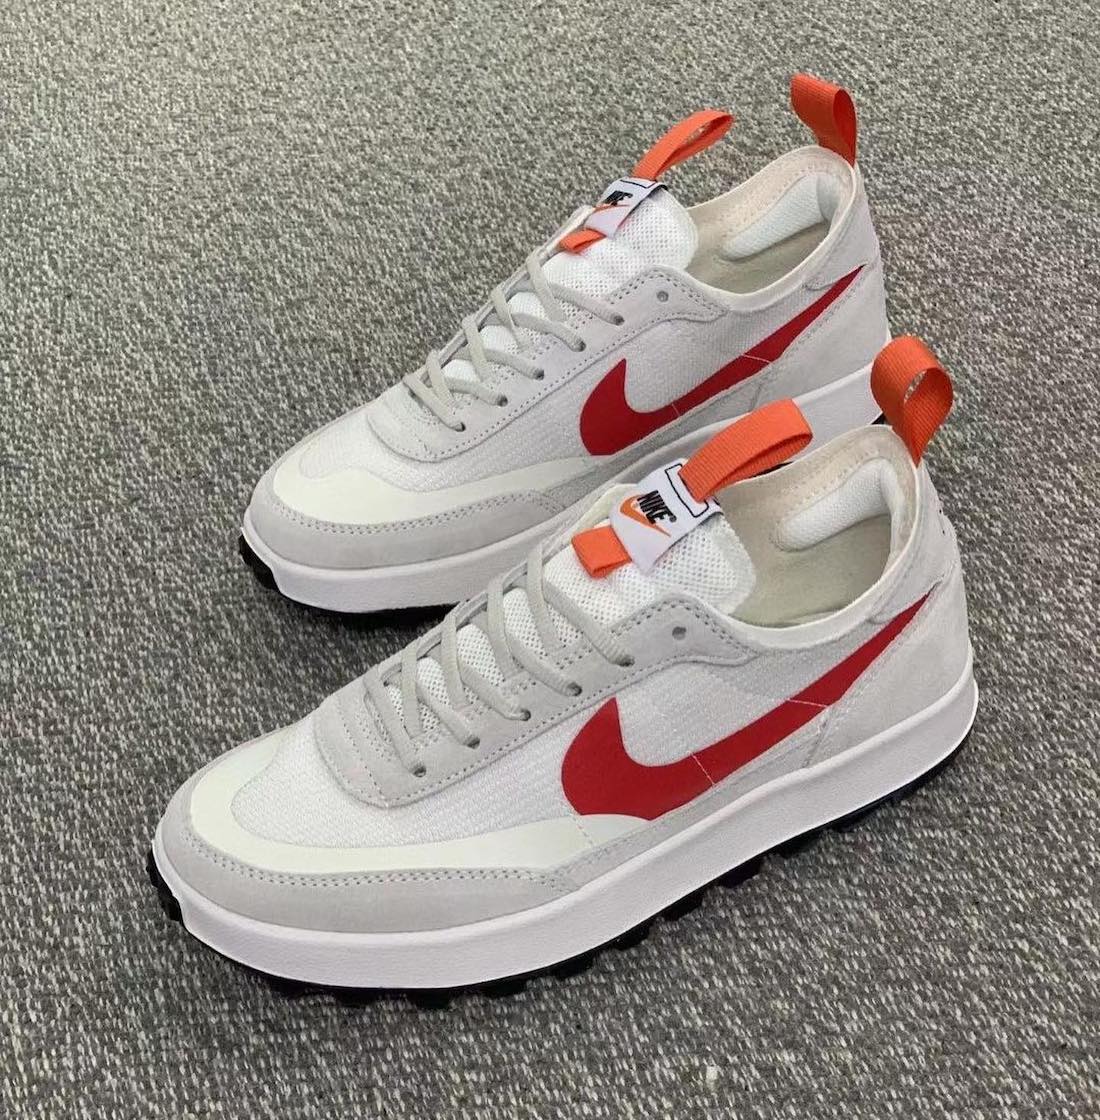 Tom Sachs NikeCraft General Purpose Shoe White Red Release Information